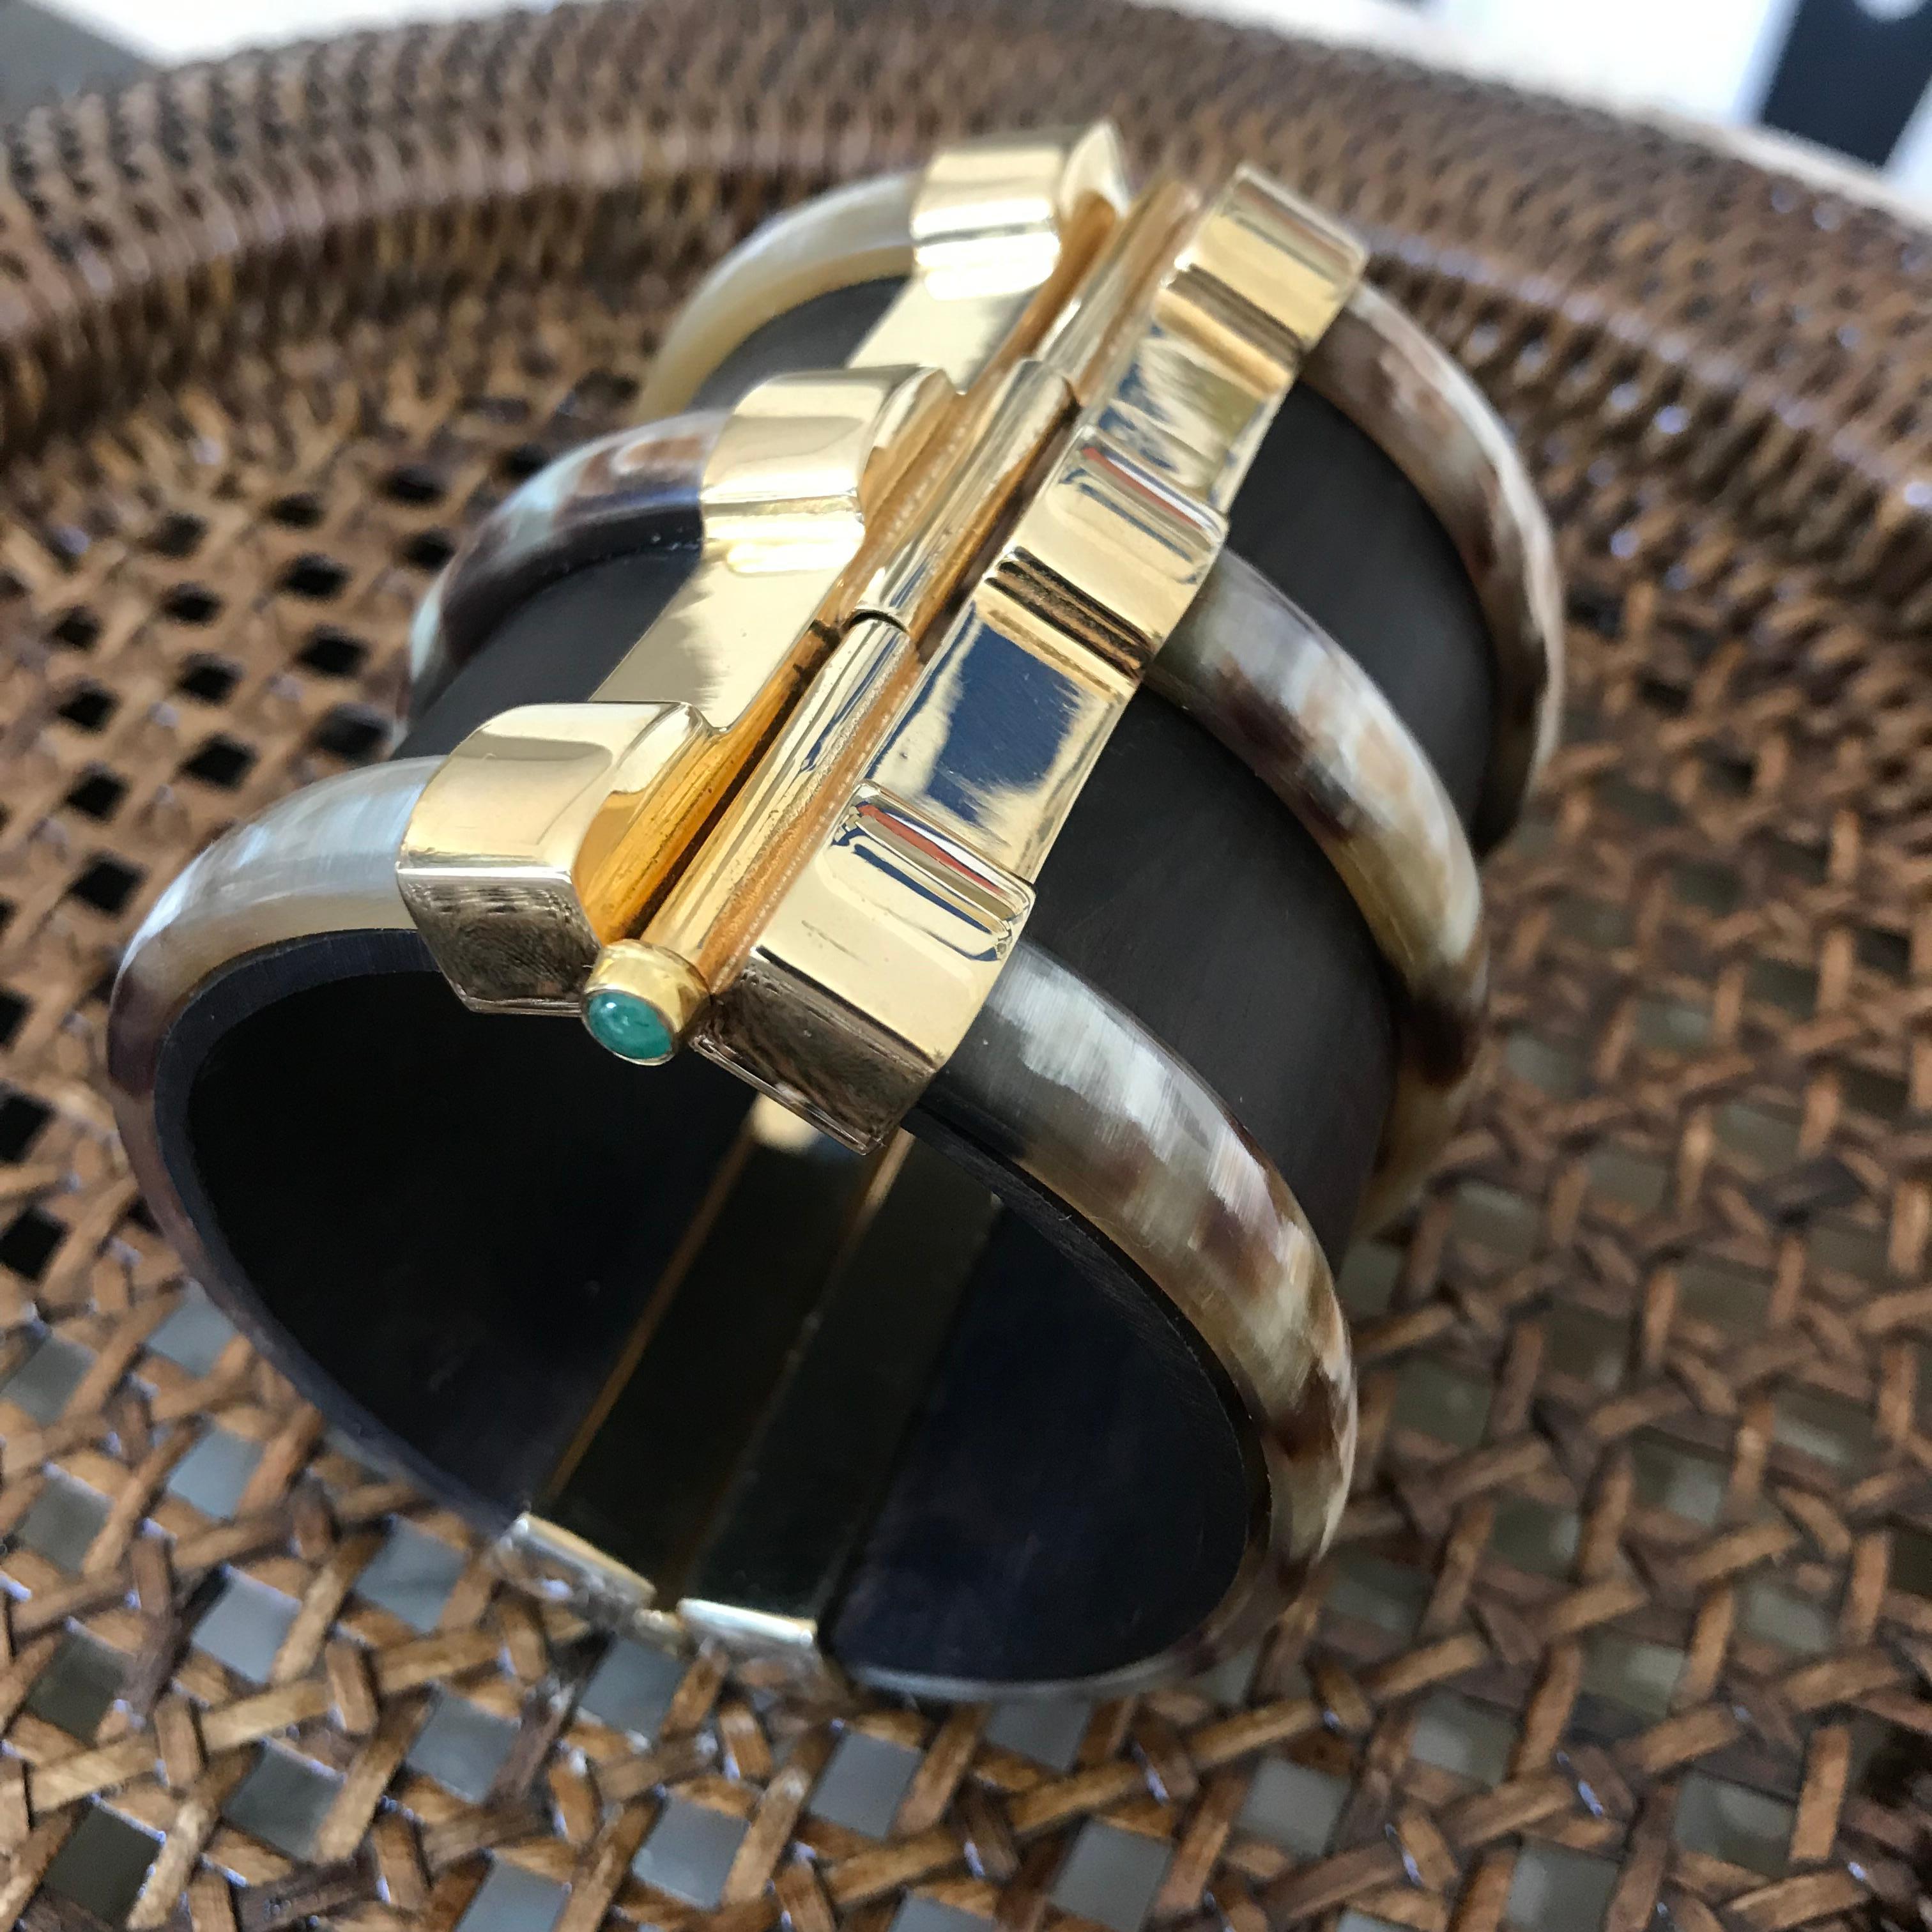 Cuff bracelet crafted by hand from ebony wood and African cow horn. The plate pin-clasp is set with an emerald. Inspired by warrior style cuffs worn by former Vogue editor Diana Vreeland. 

Hand crafted by artisans in Kenya, East Africa and finished